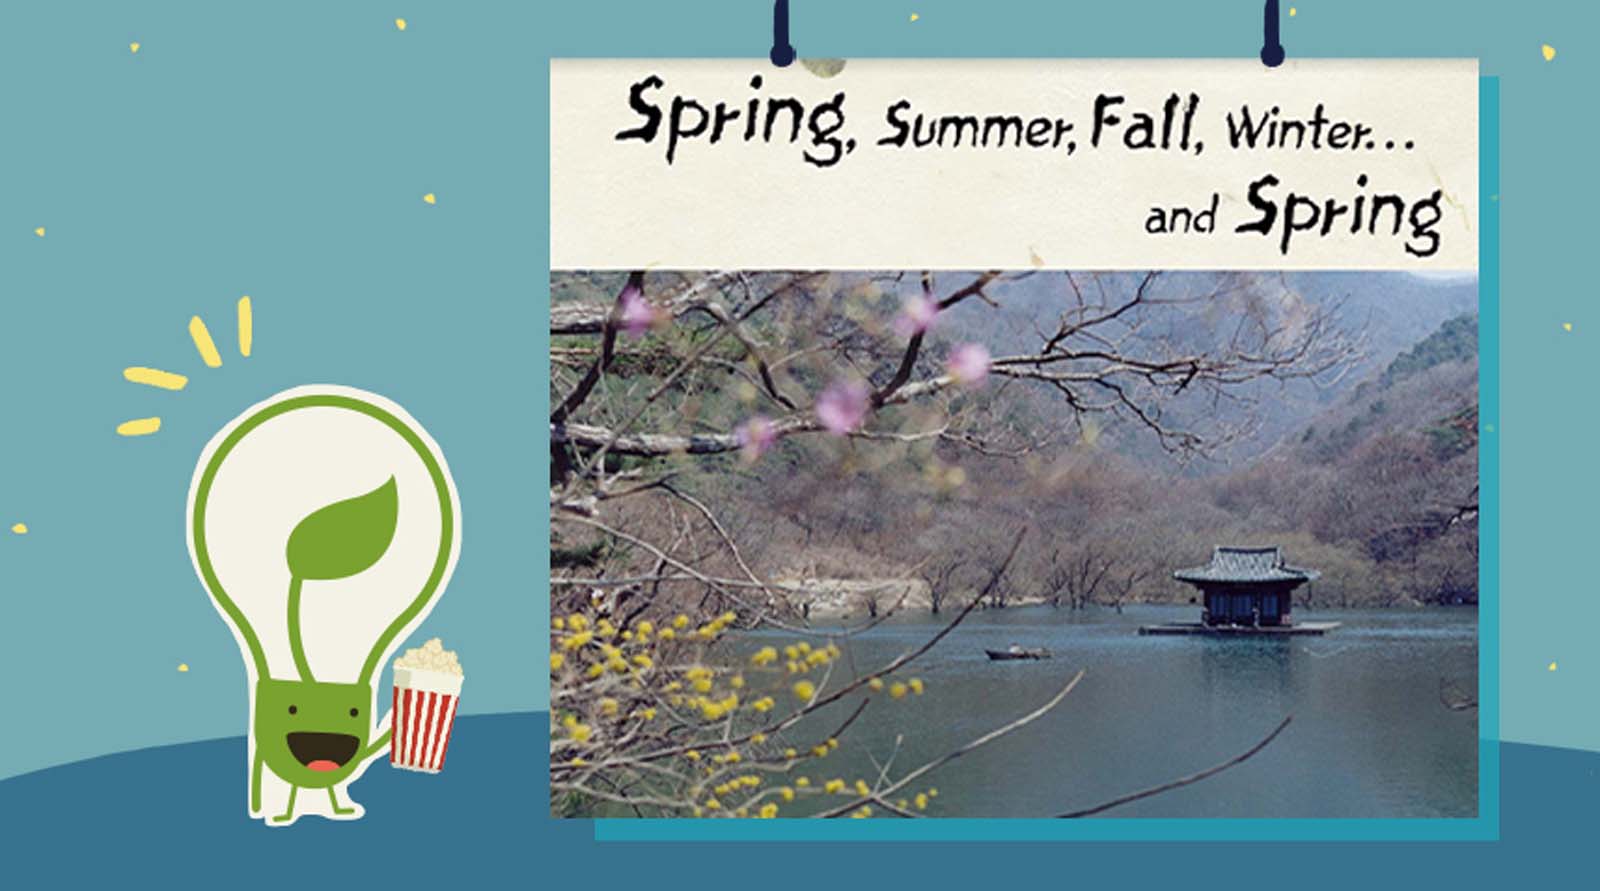 Film Review: Spring, Summer, Fall, Winter… and Spring (M18: Mature Theme)